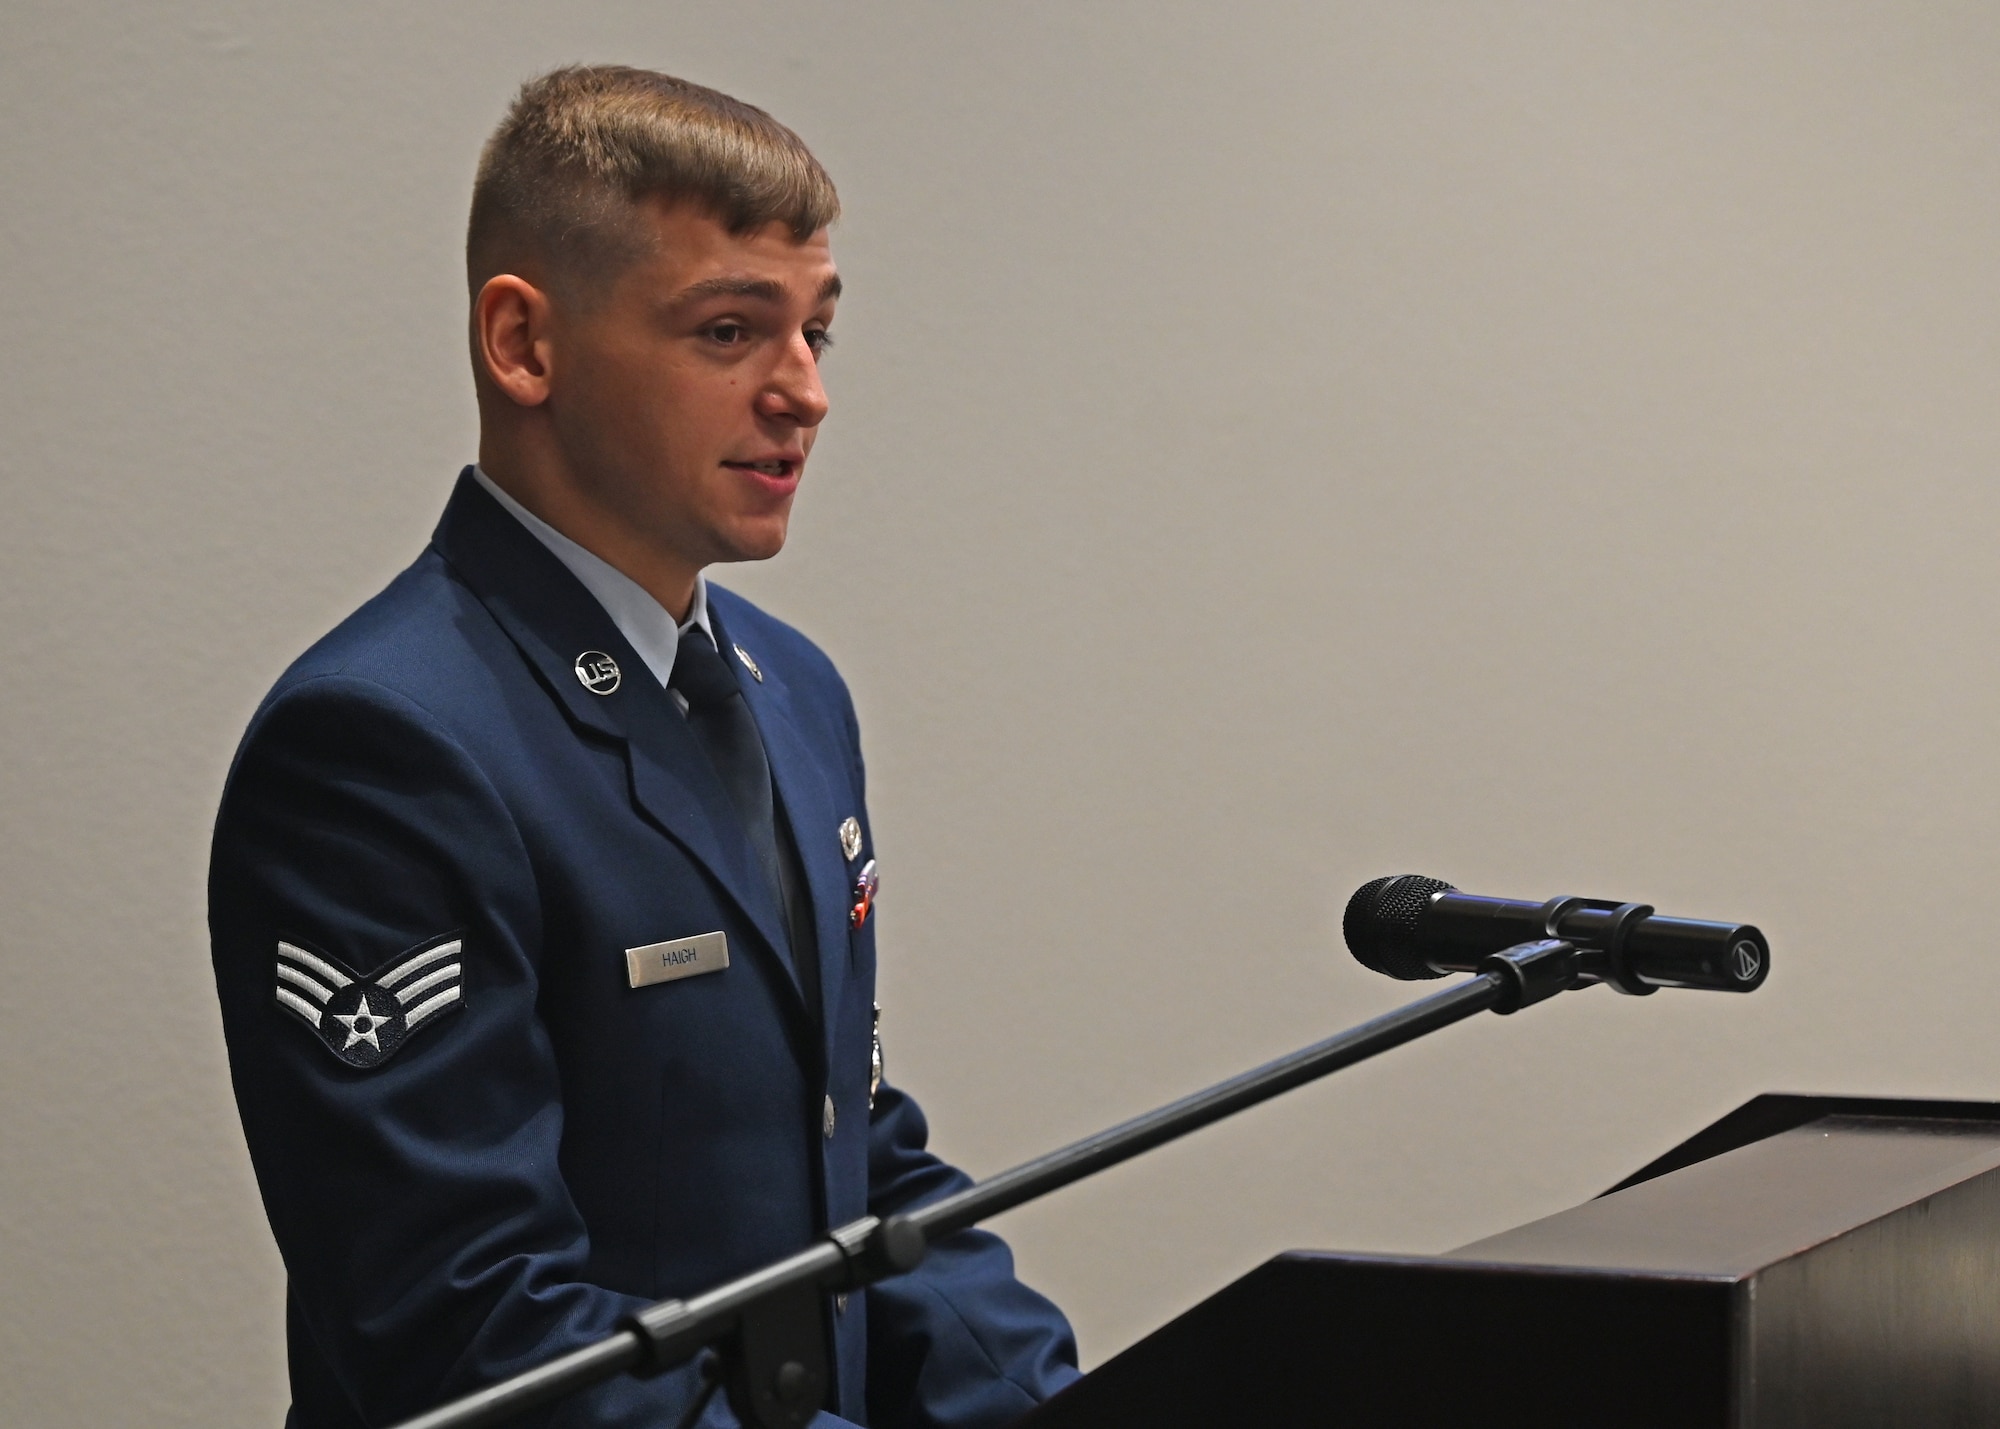 U.S. Air Force Senior Airman Mark Haigh Jr., Class 23-E Airman Leadership School graduate, delivers the class speech at the Class 23-E ALS graduation in the Powell Event Center, Goodfellow Air Force Base, Texas, July 20, 2023. Haigh recounted his time with his class and shared stories of their comradery. (U.S. Air Force photo by Senior Airman Ethan Sherwood)